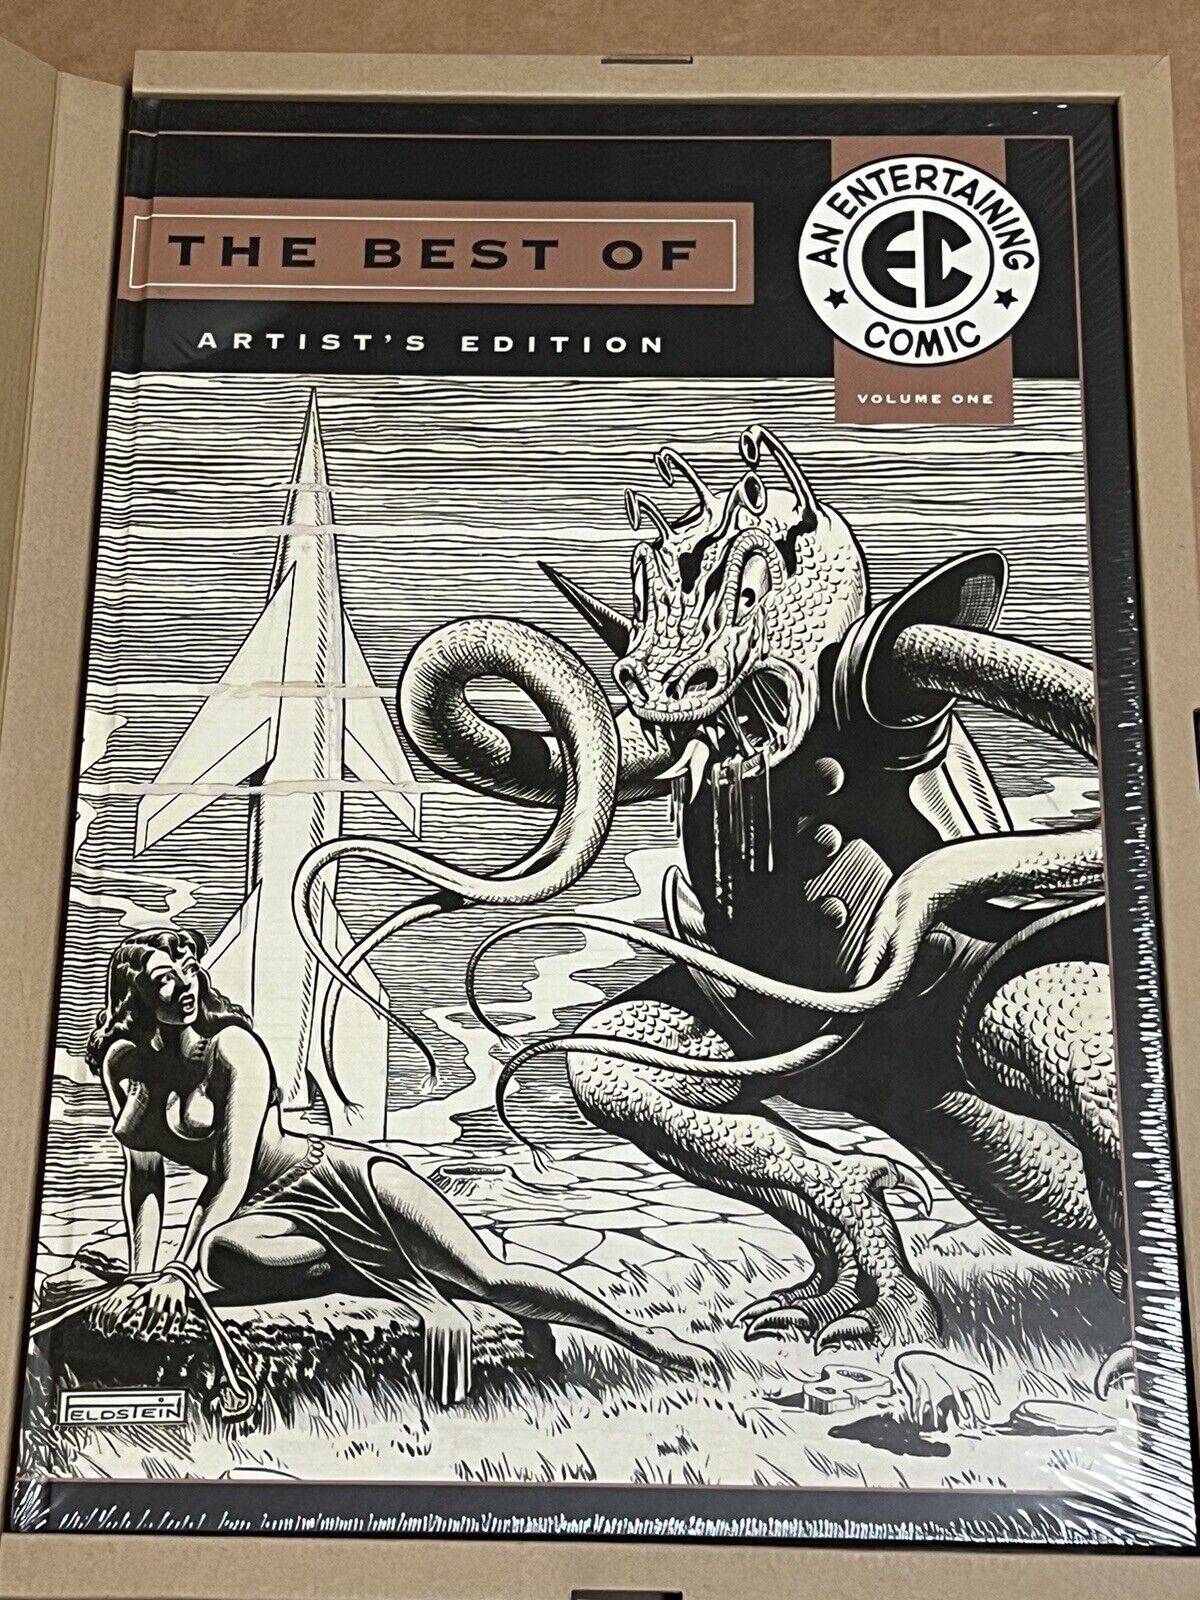 THE BEST OF EC ARTIST EDITION IDW VARIANT SIGNED BY AL FIELDSTEIN LIMITED TO 250